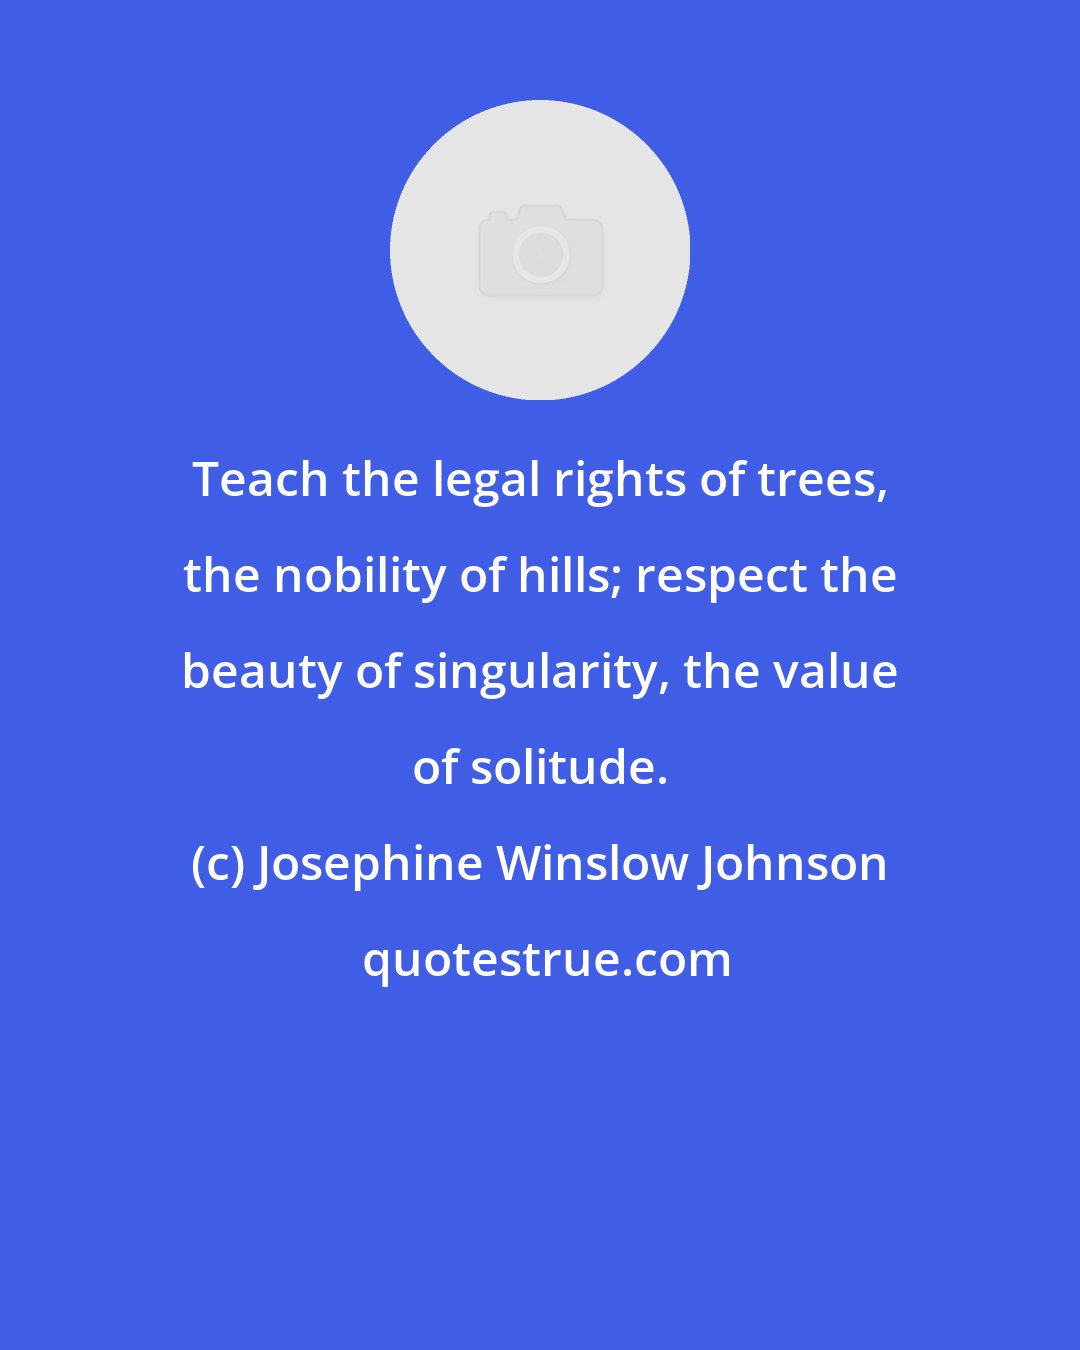 Josephine Winslow Johnson: Teach the legal rights of trees, the nobility of hills; respect the beauty of singularity, the value of solitude.